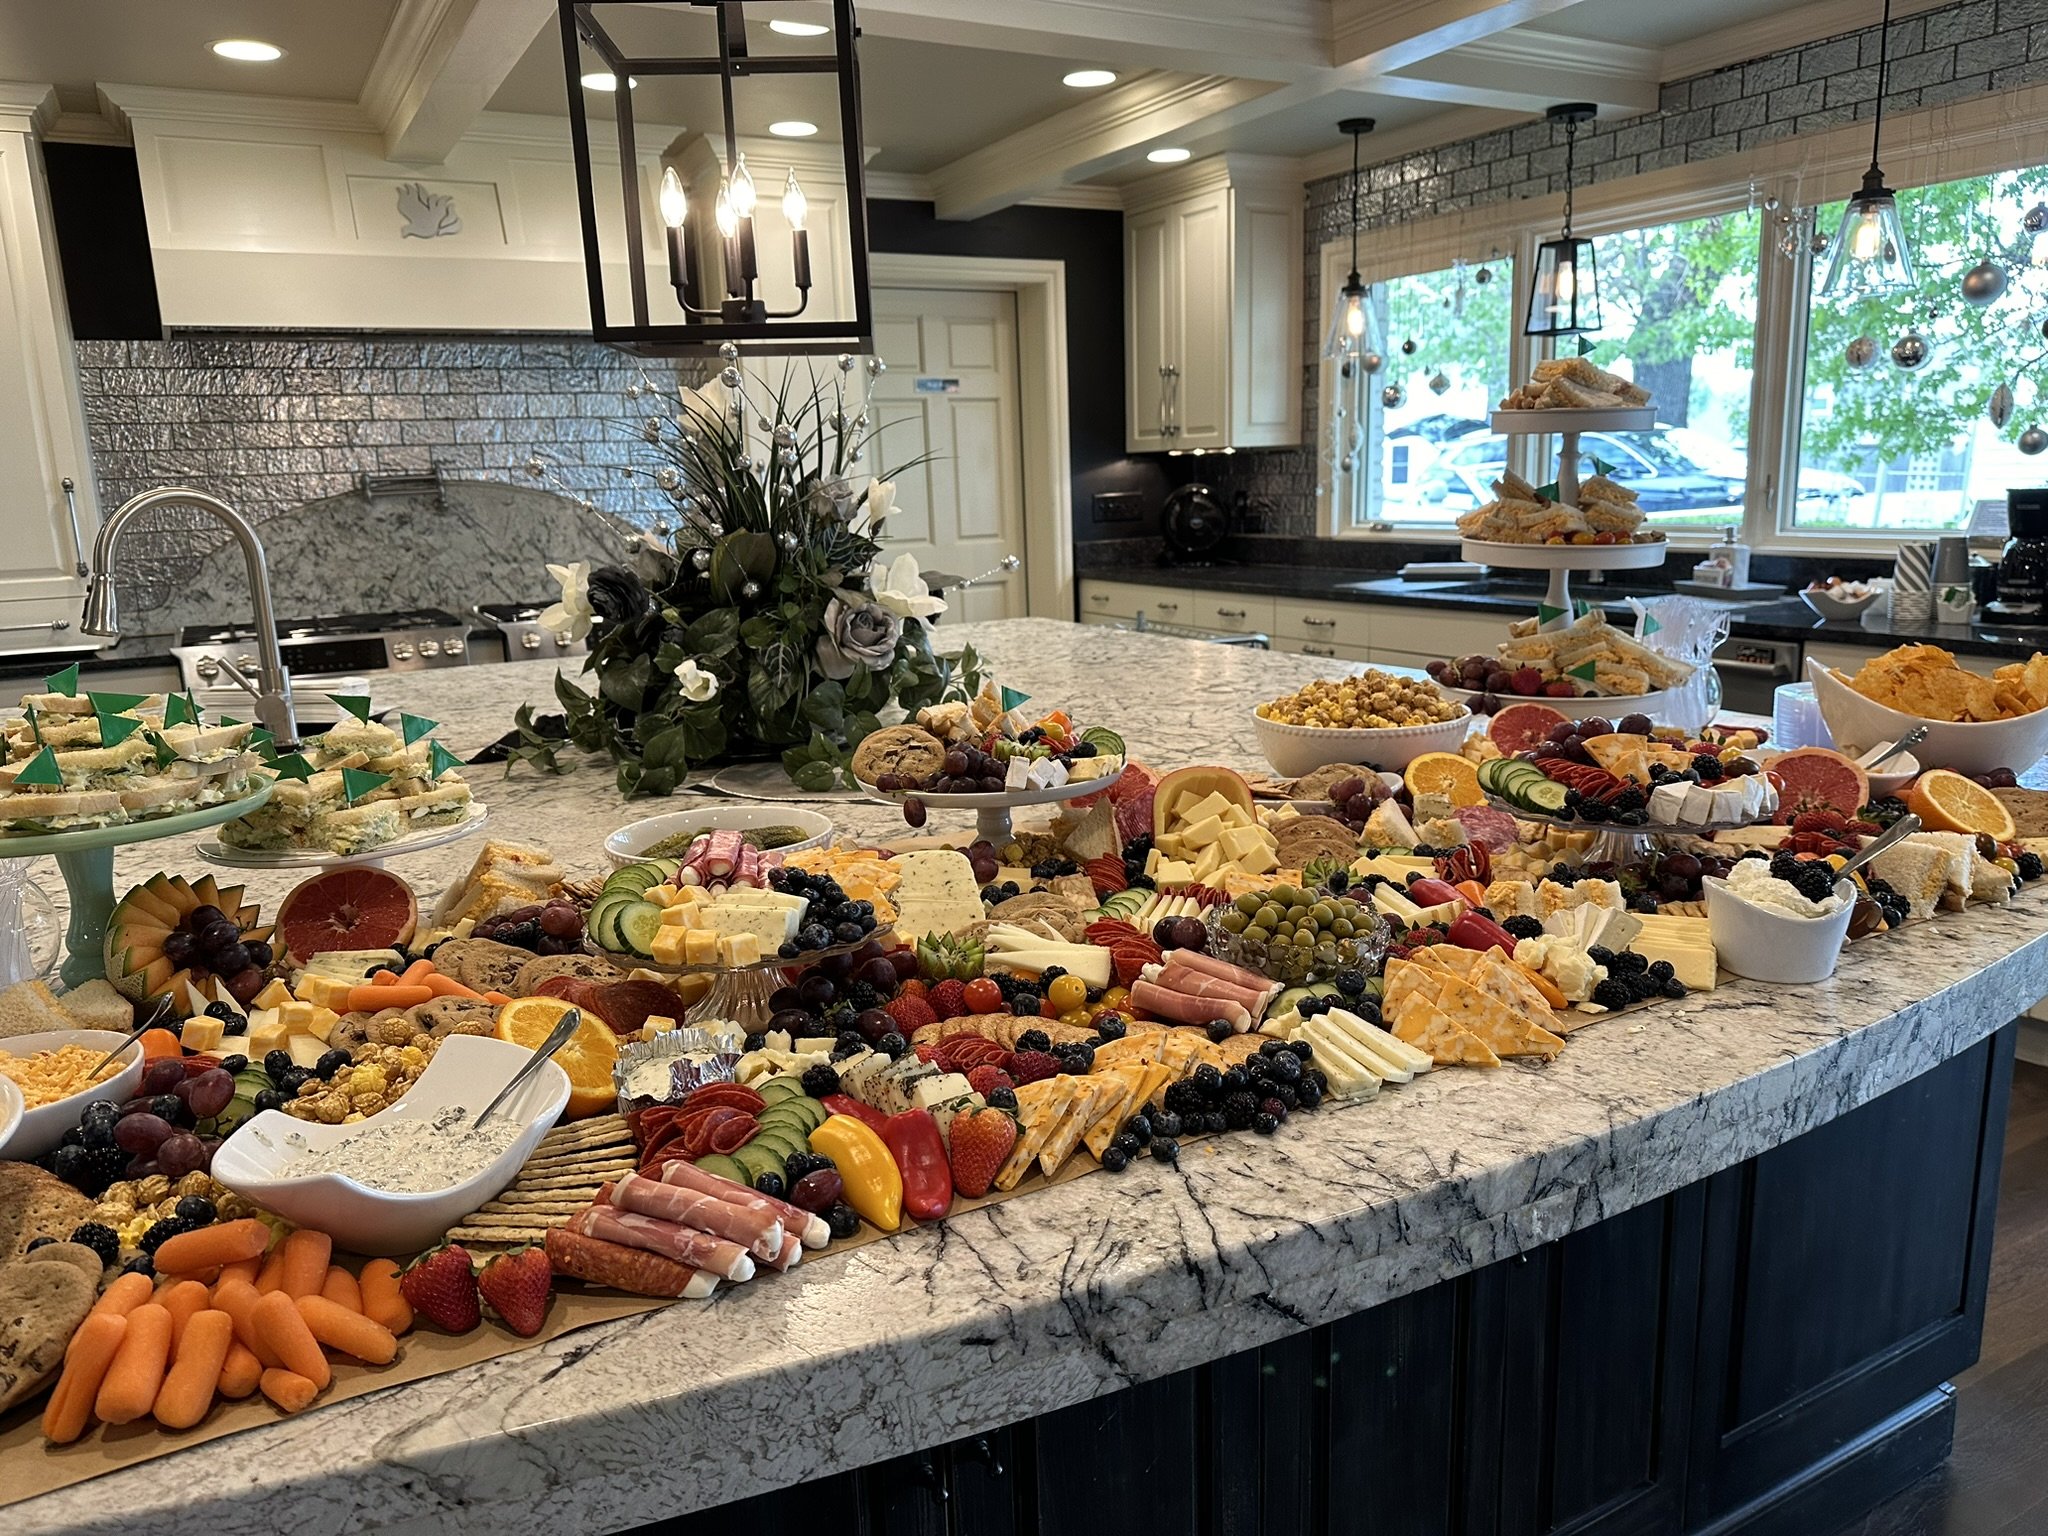 A fun Master's themed charcuterie board complete with pimento cheese/chicken salad sandwiches, cookies, and chips! A great event for Edward Jones-  Financial Advisor-  Brett Thompson at The Mansion at Terra Place ⛳️⛳️